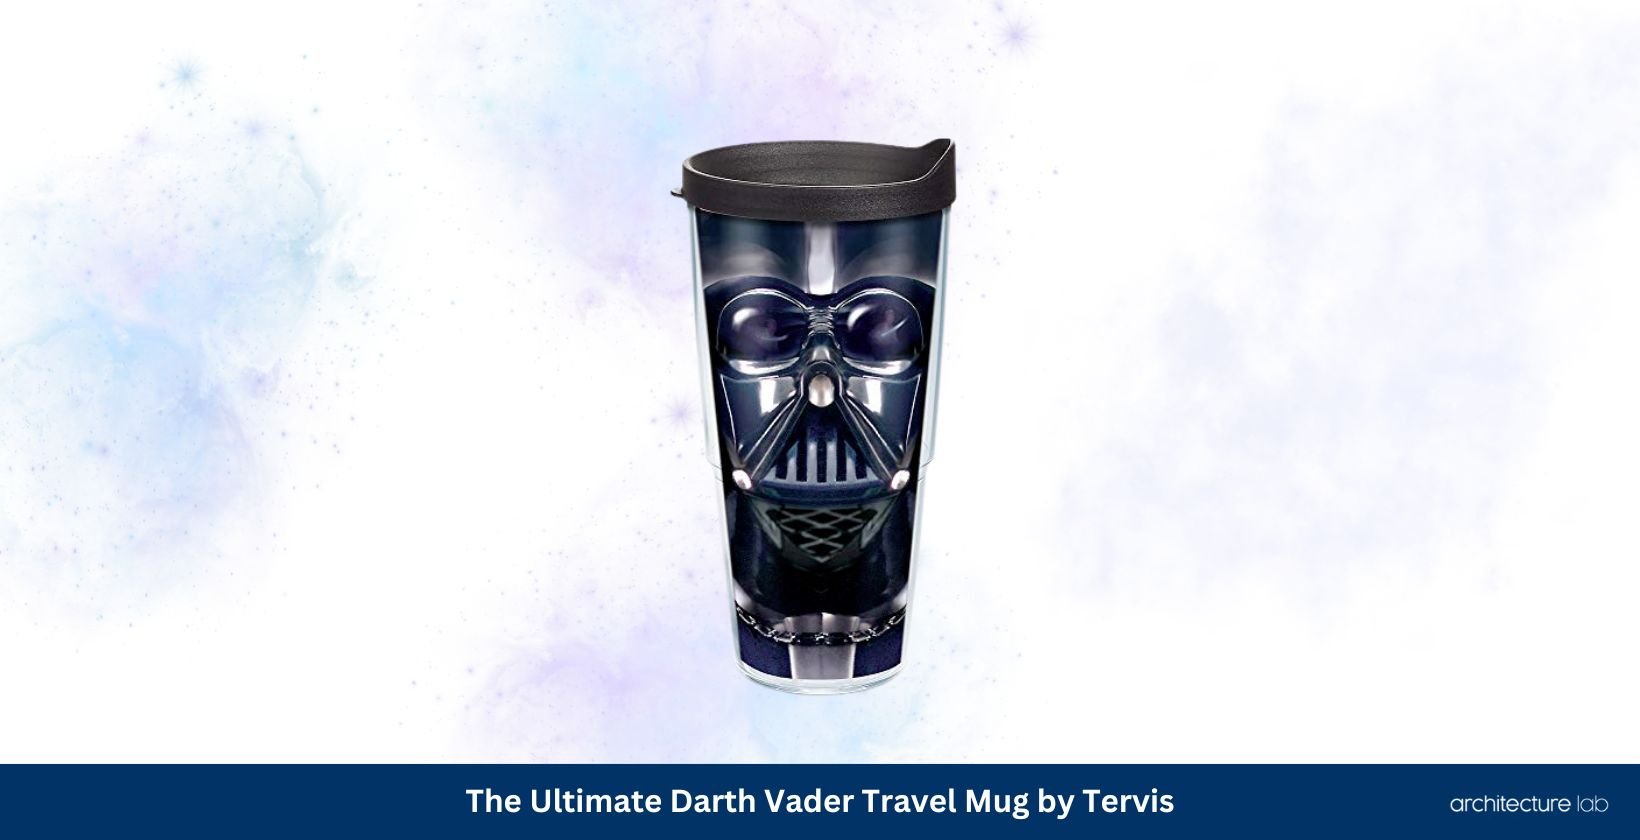 The ultimate darth vader travel mug by tervis